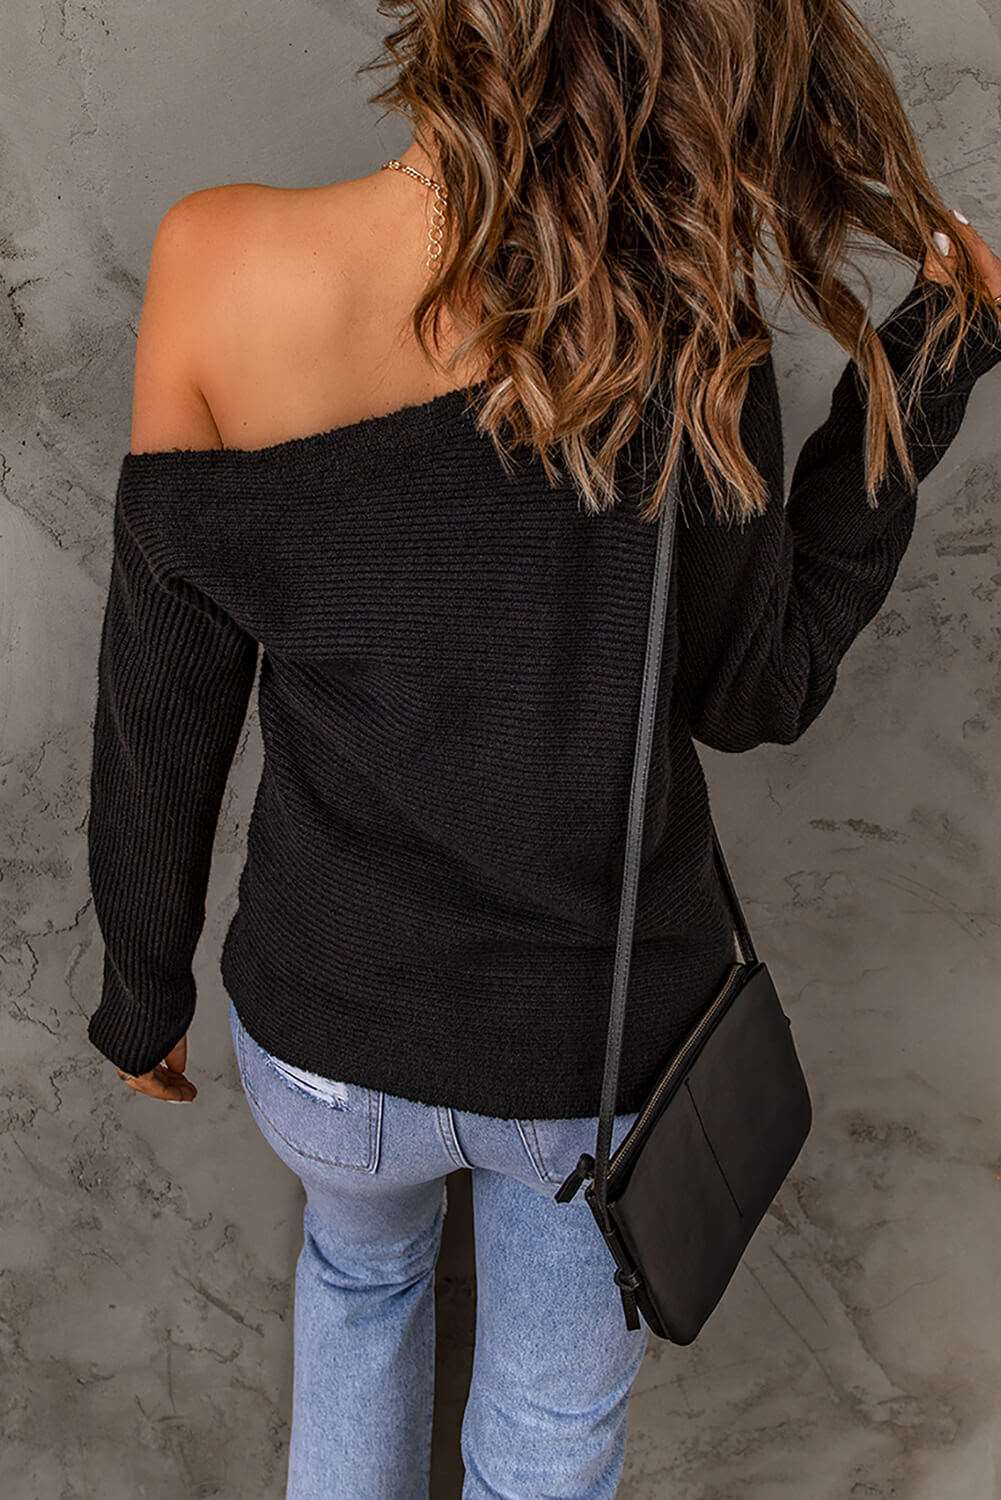 A Horizontal One-Shoulder Sweater